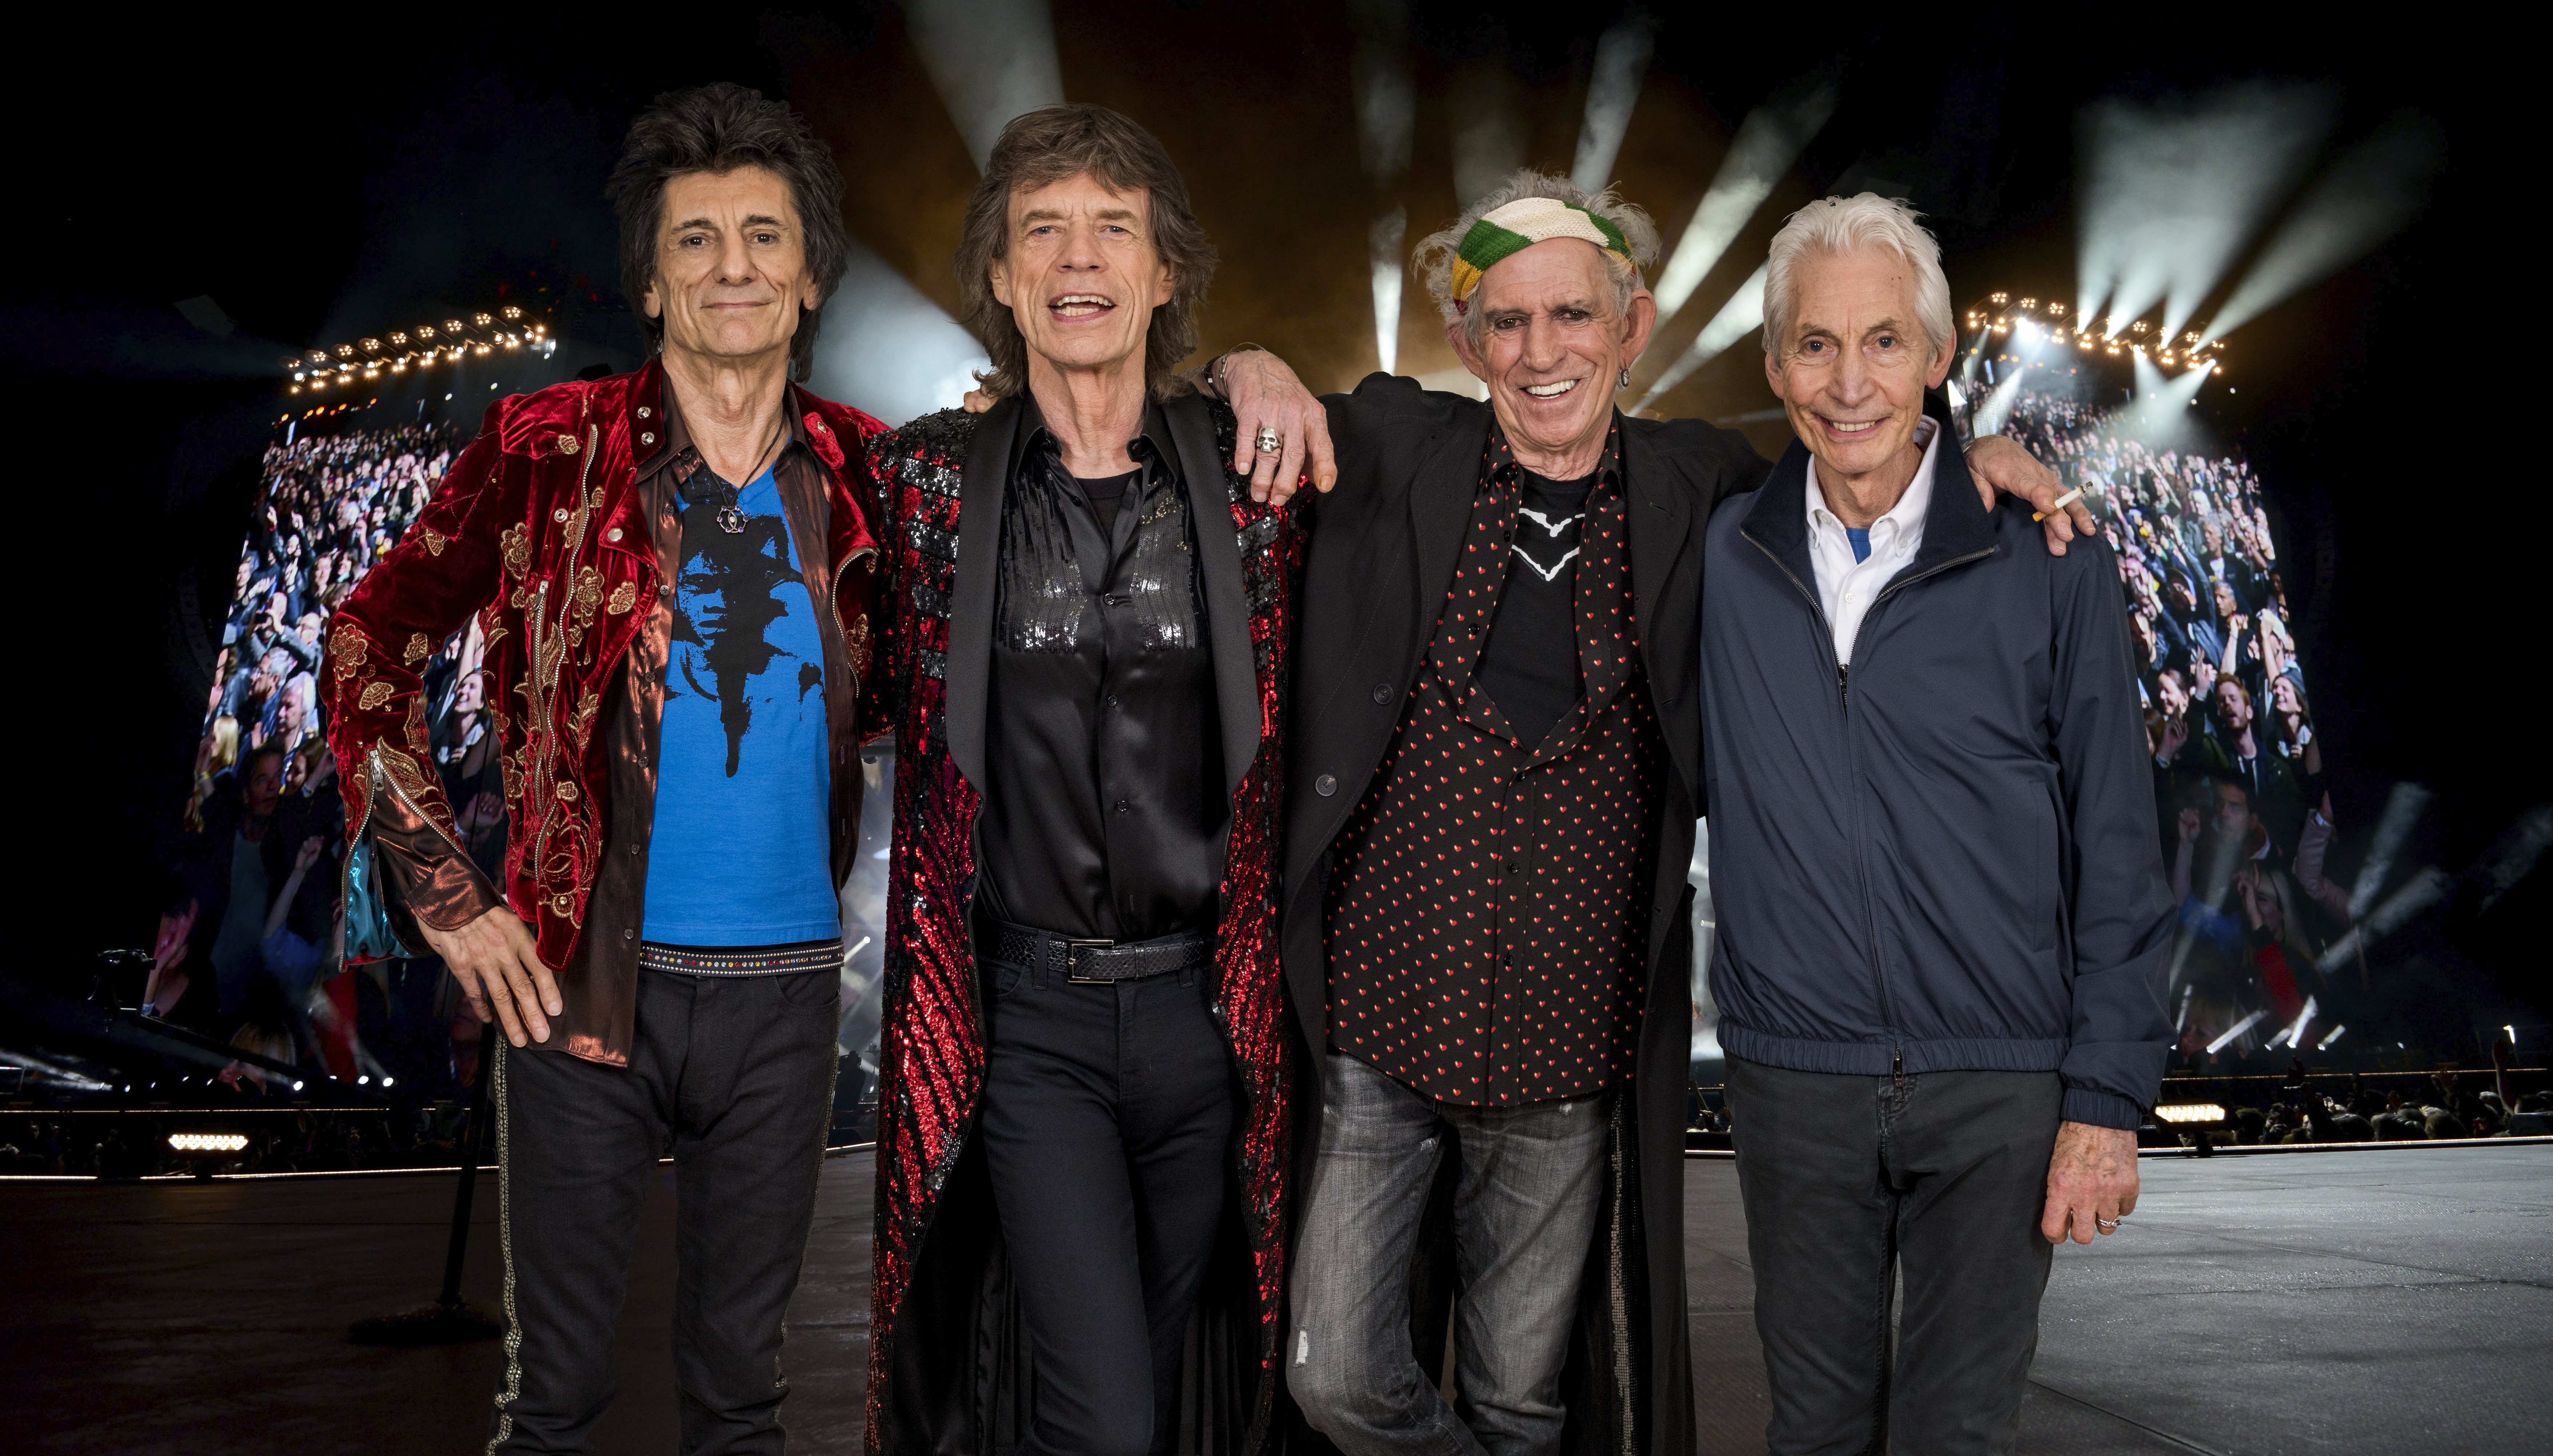 Los Rolling Stones (Photo by Dave J Hogan/Dave J Hogan/Getty Images for The Rolling Stones)